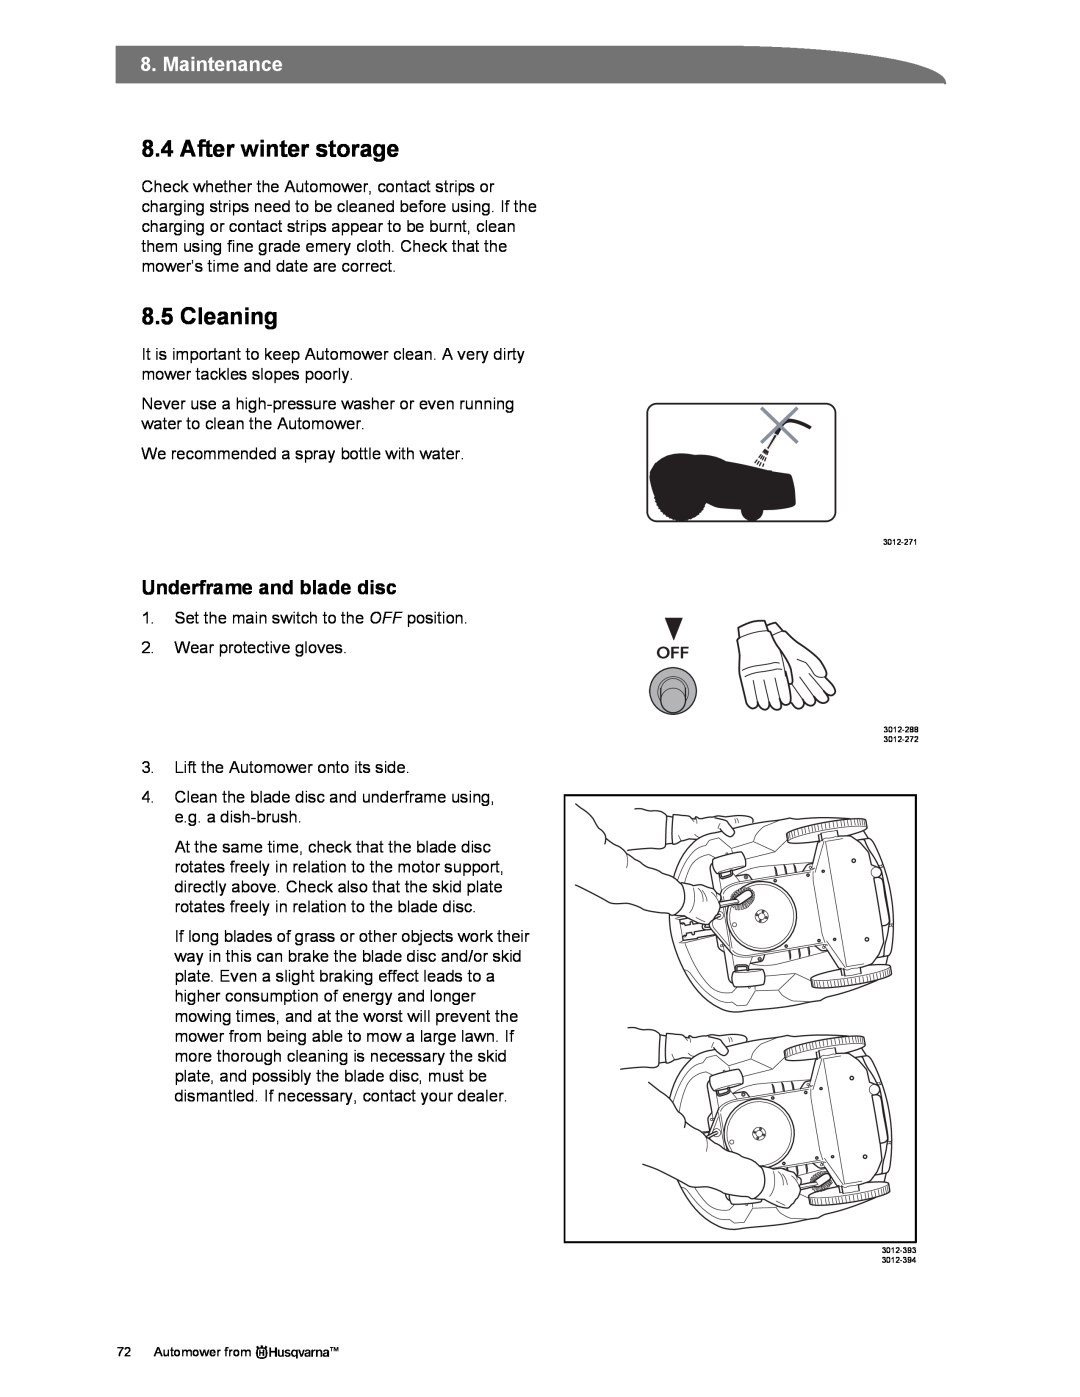 Husqvarna Automower manual After winter storage, Cleaning, Underframe and blade disc, Maintenance 